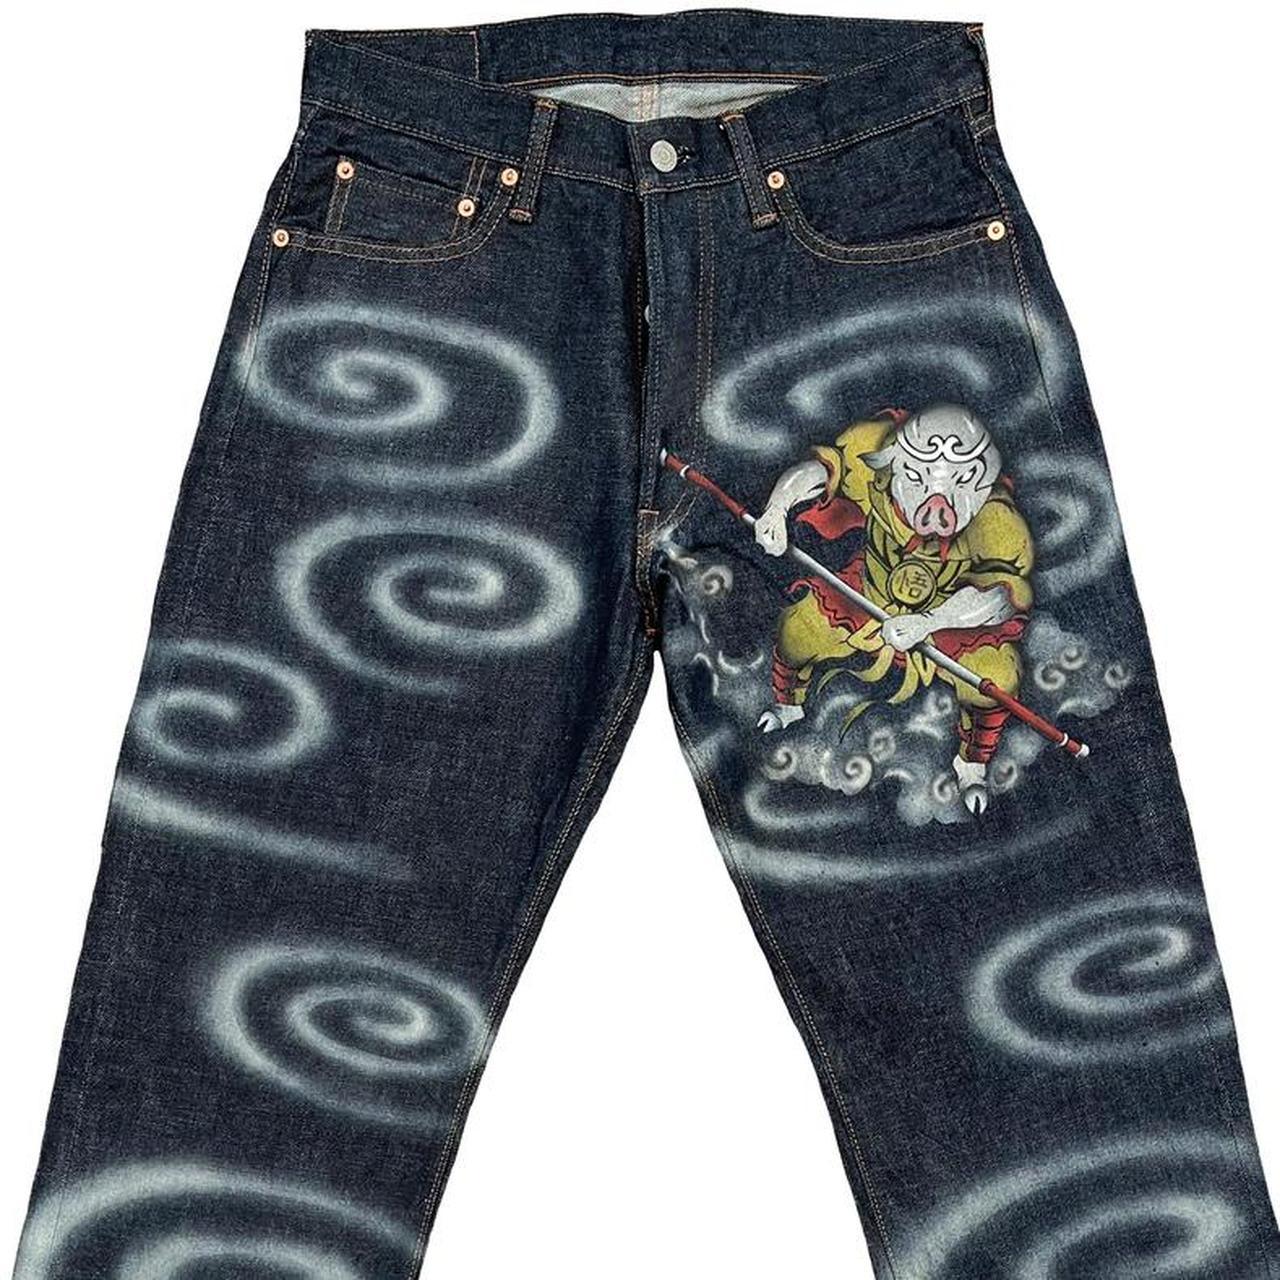 Studio D’Artisan Airbrushed Jeans - Known Source